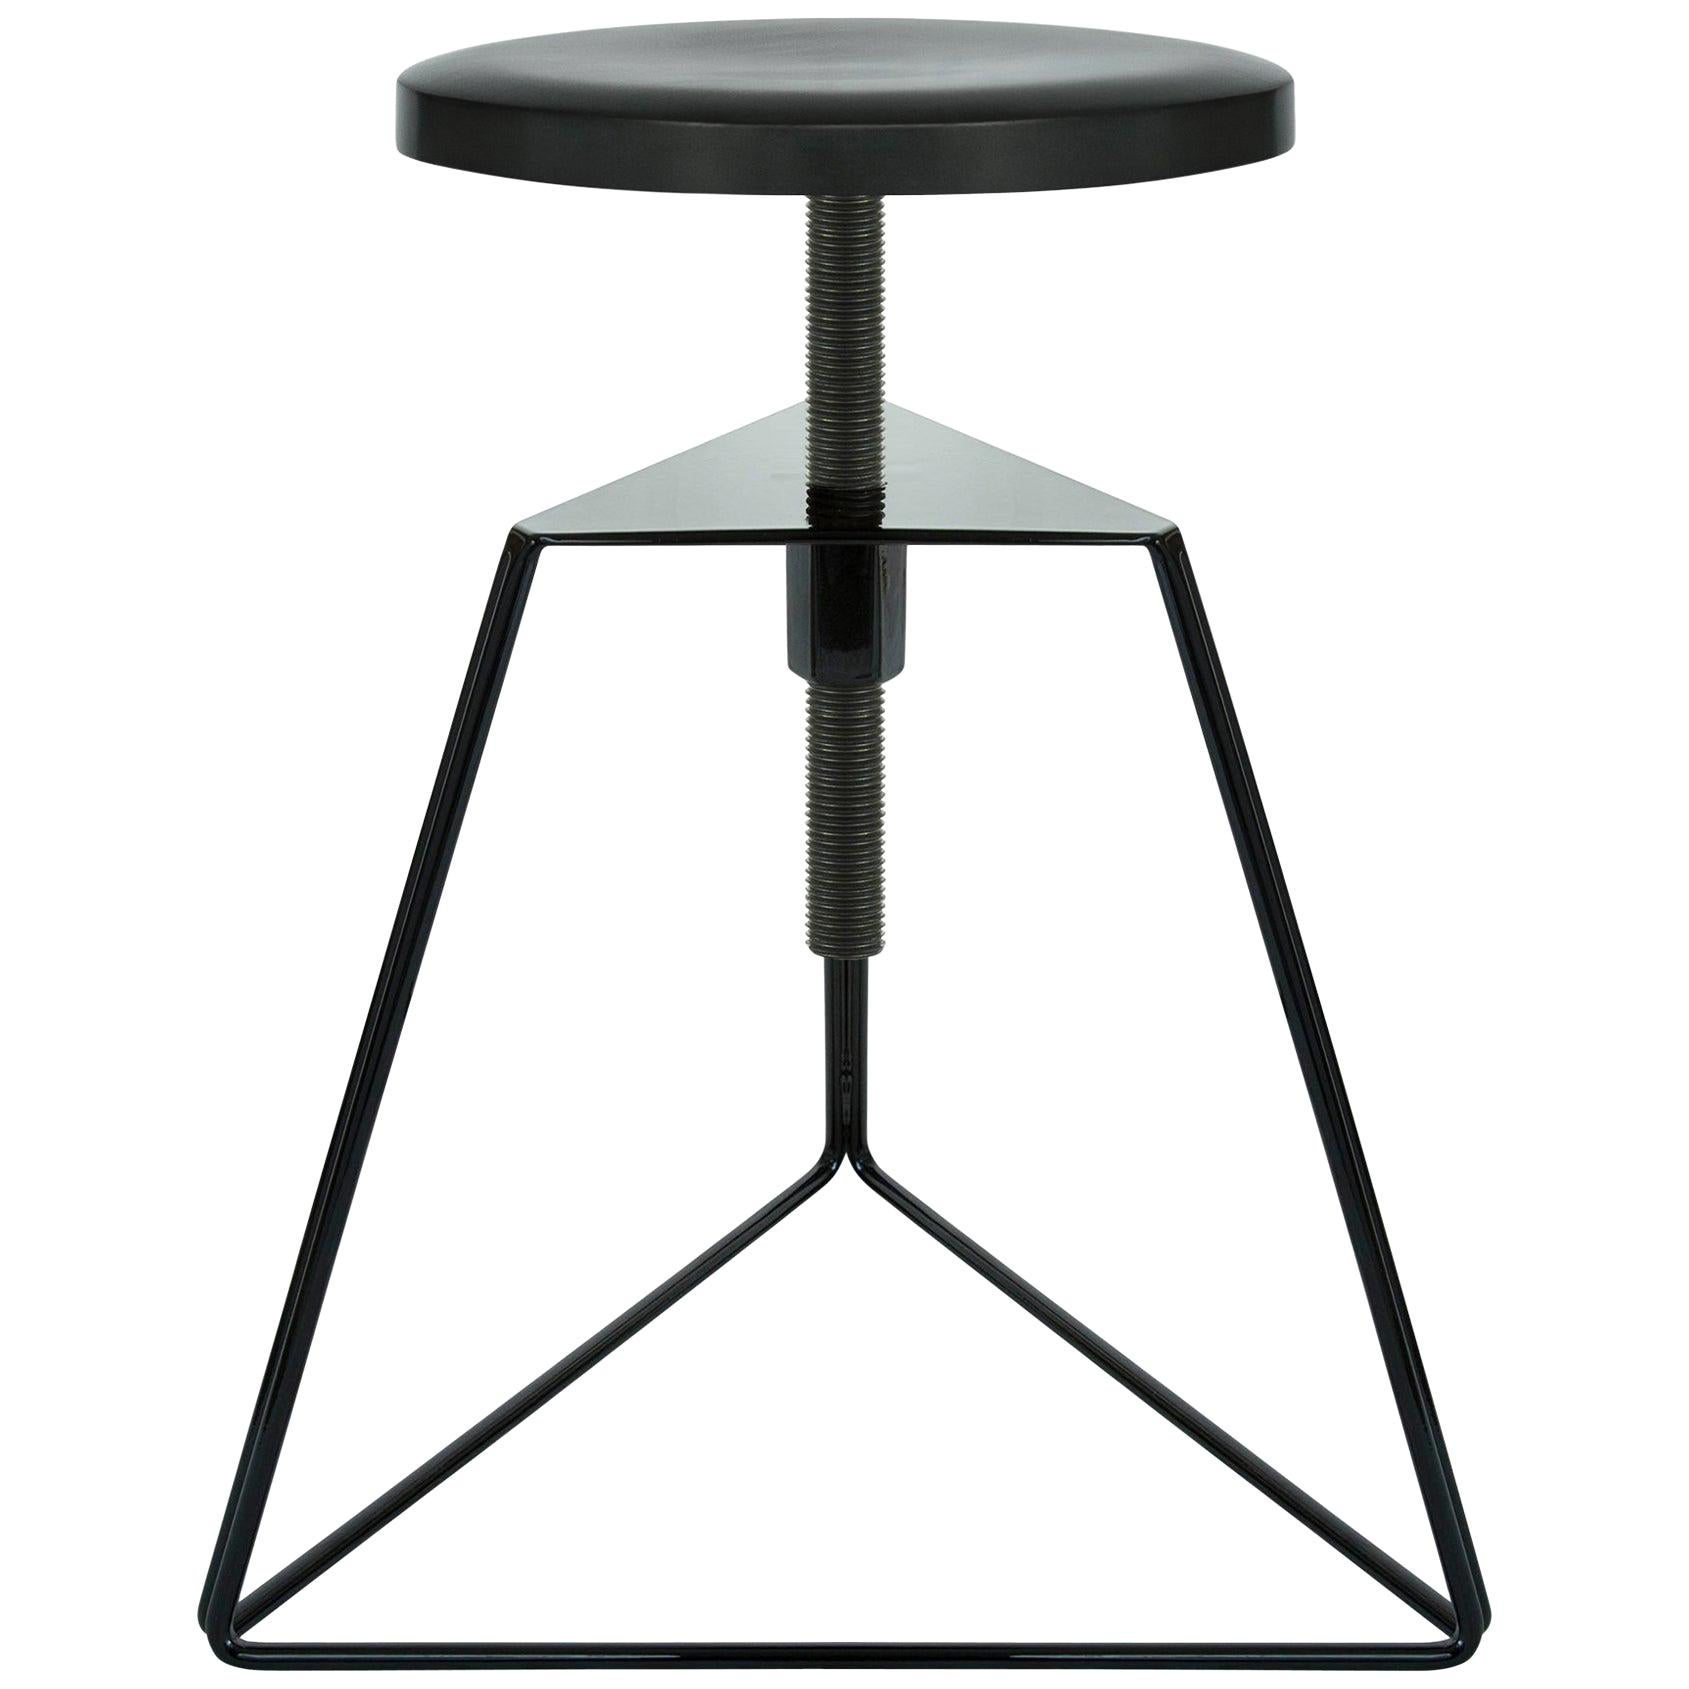 Camp Stool, Black and Charcoal, Adjustable Height, 100% USA Made For Sale